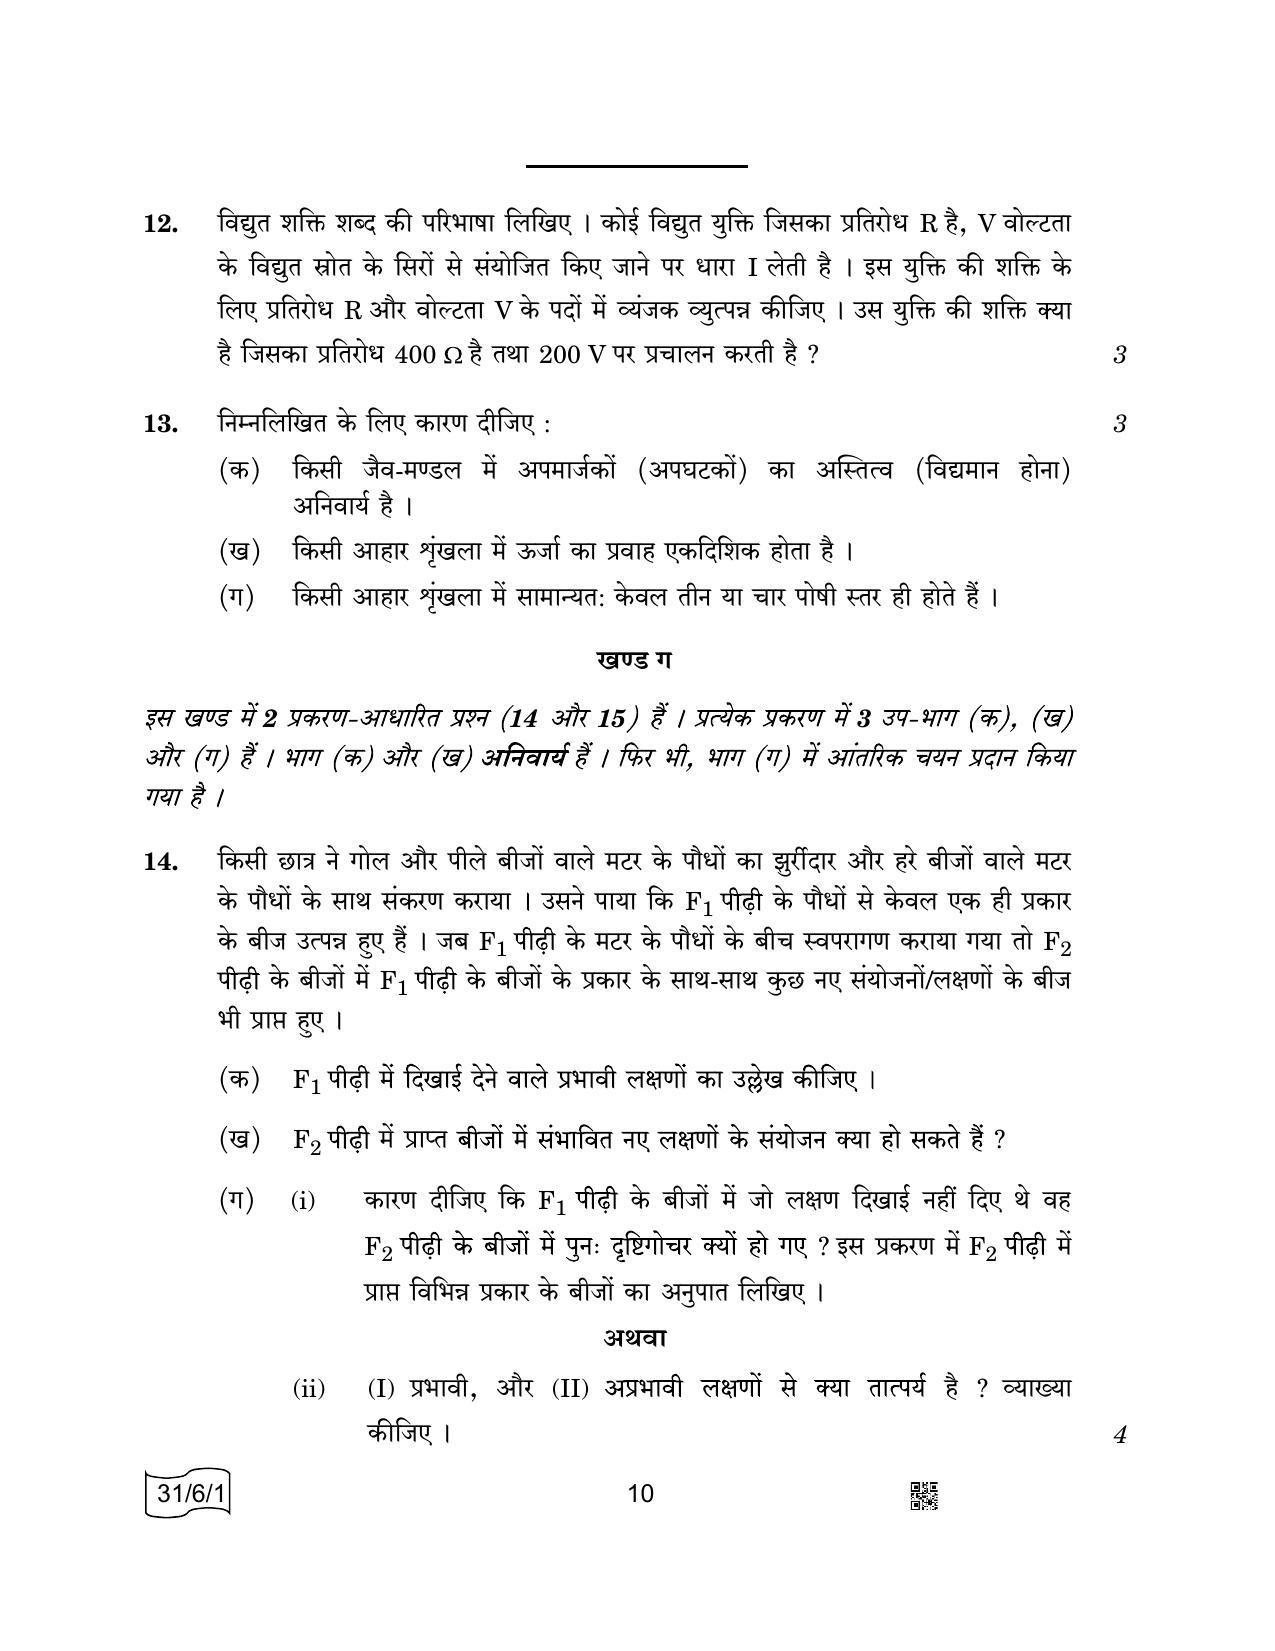 CBSE Class 10 31-6-1 SCIENCE 2022 Compartment Question Paper - Page 10